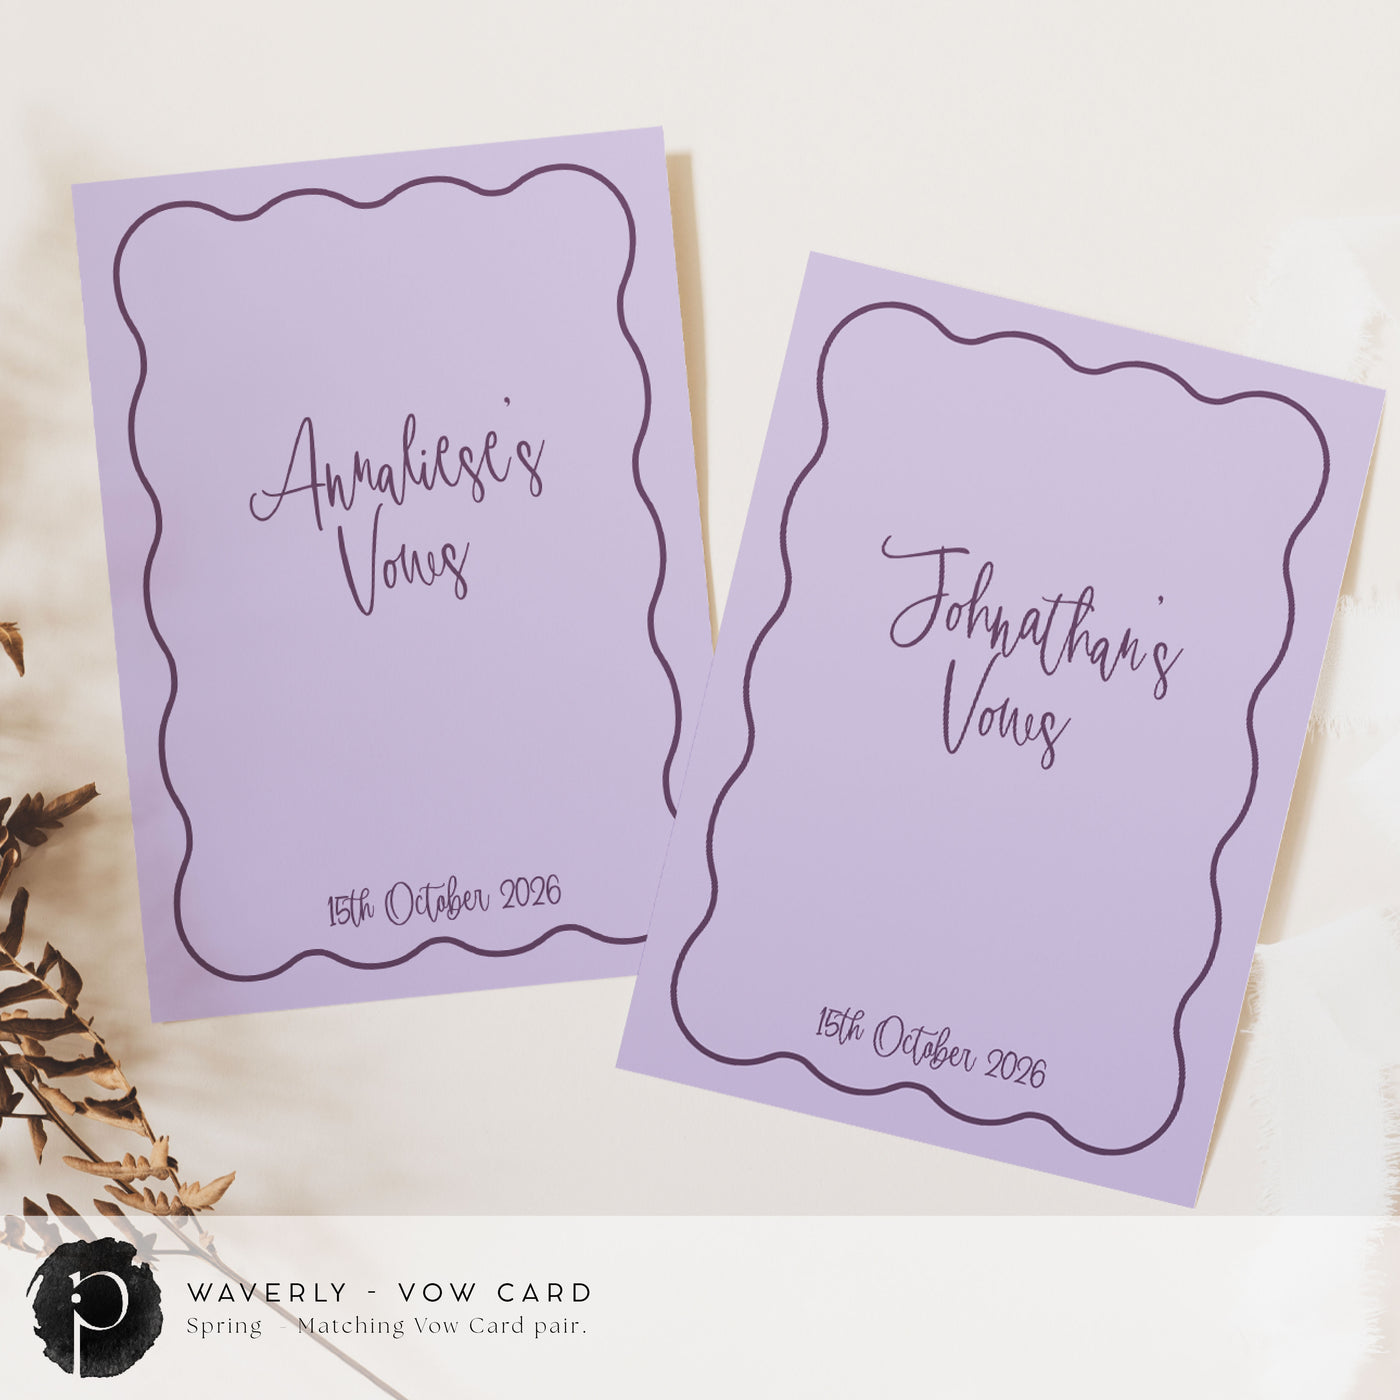 A pair of vow cards to write your wedding vows on in a modern retro wedding theme with dark purple writing on a light lilac purple background